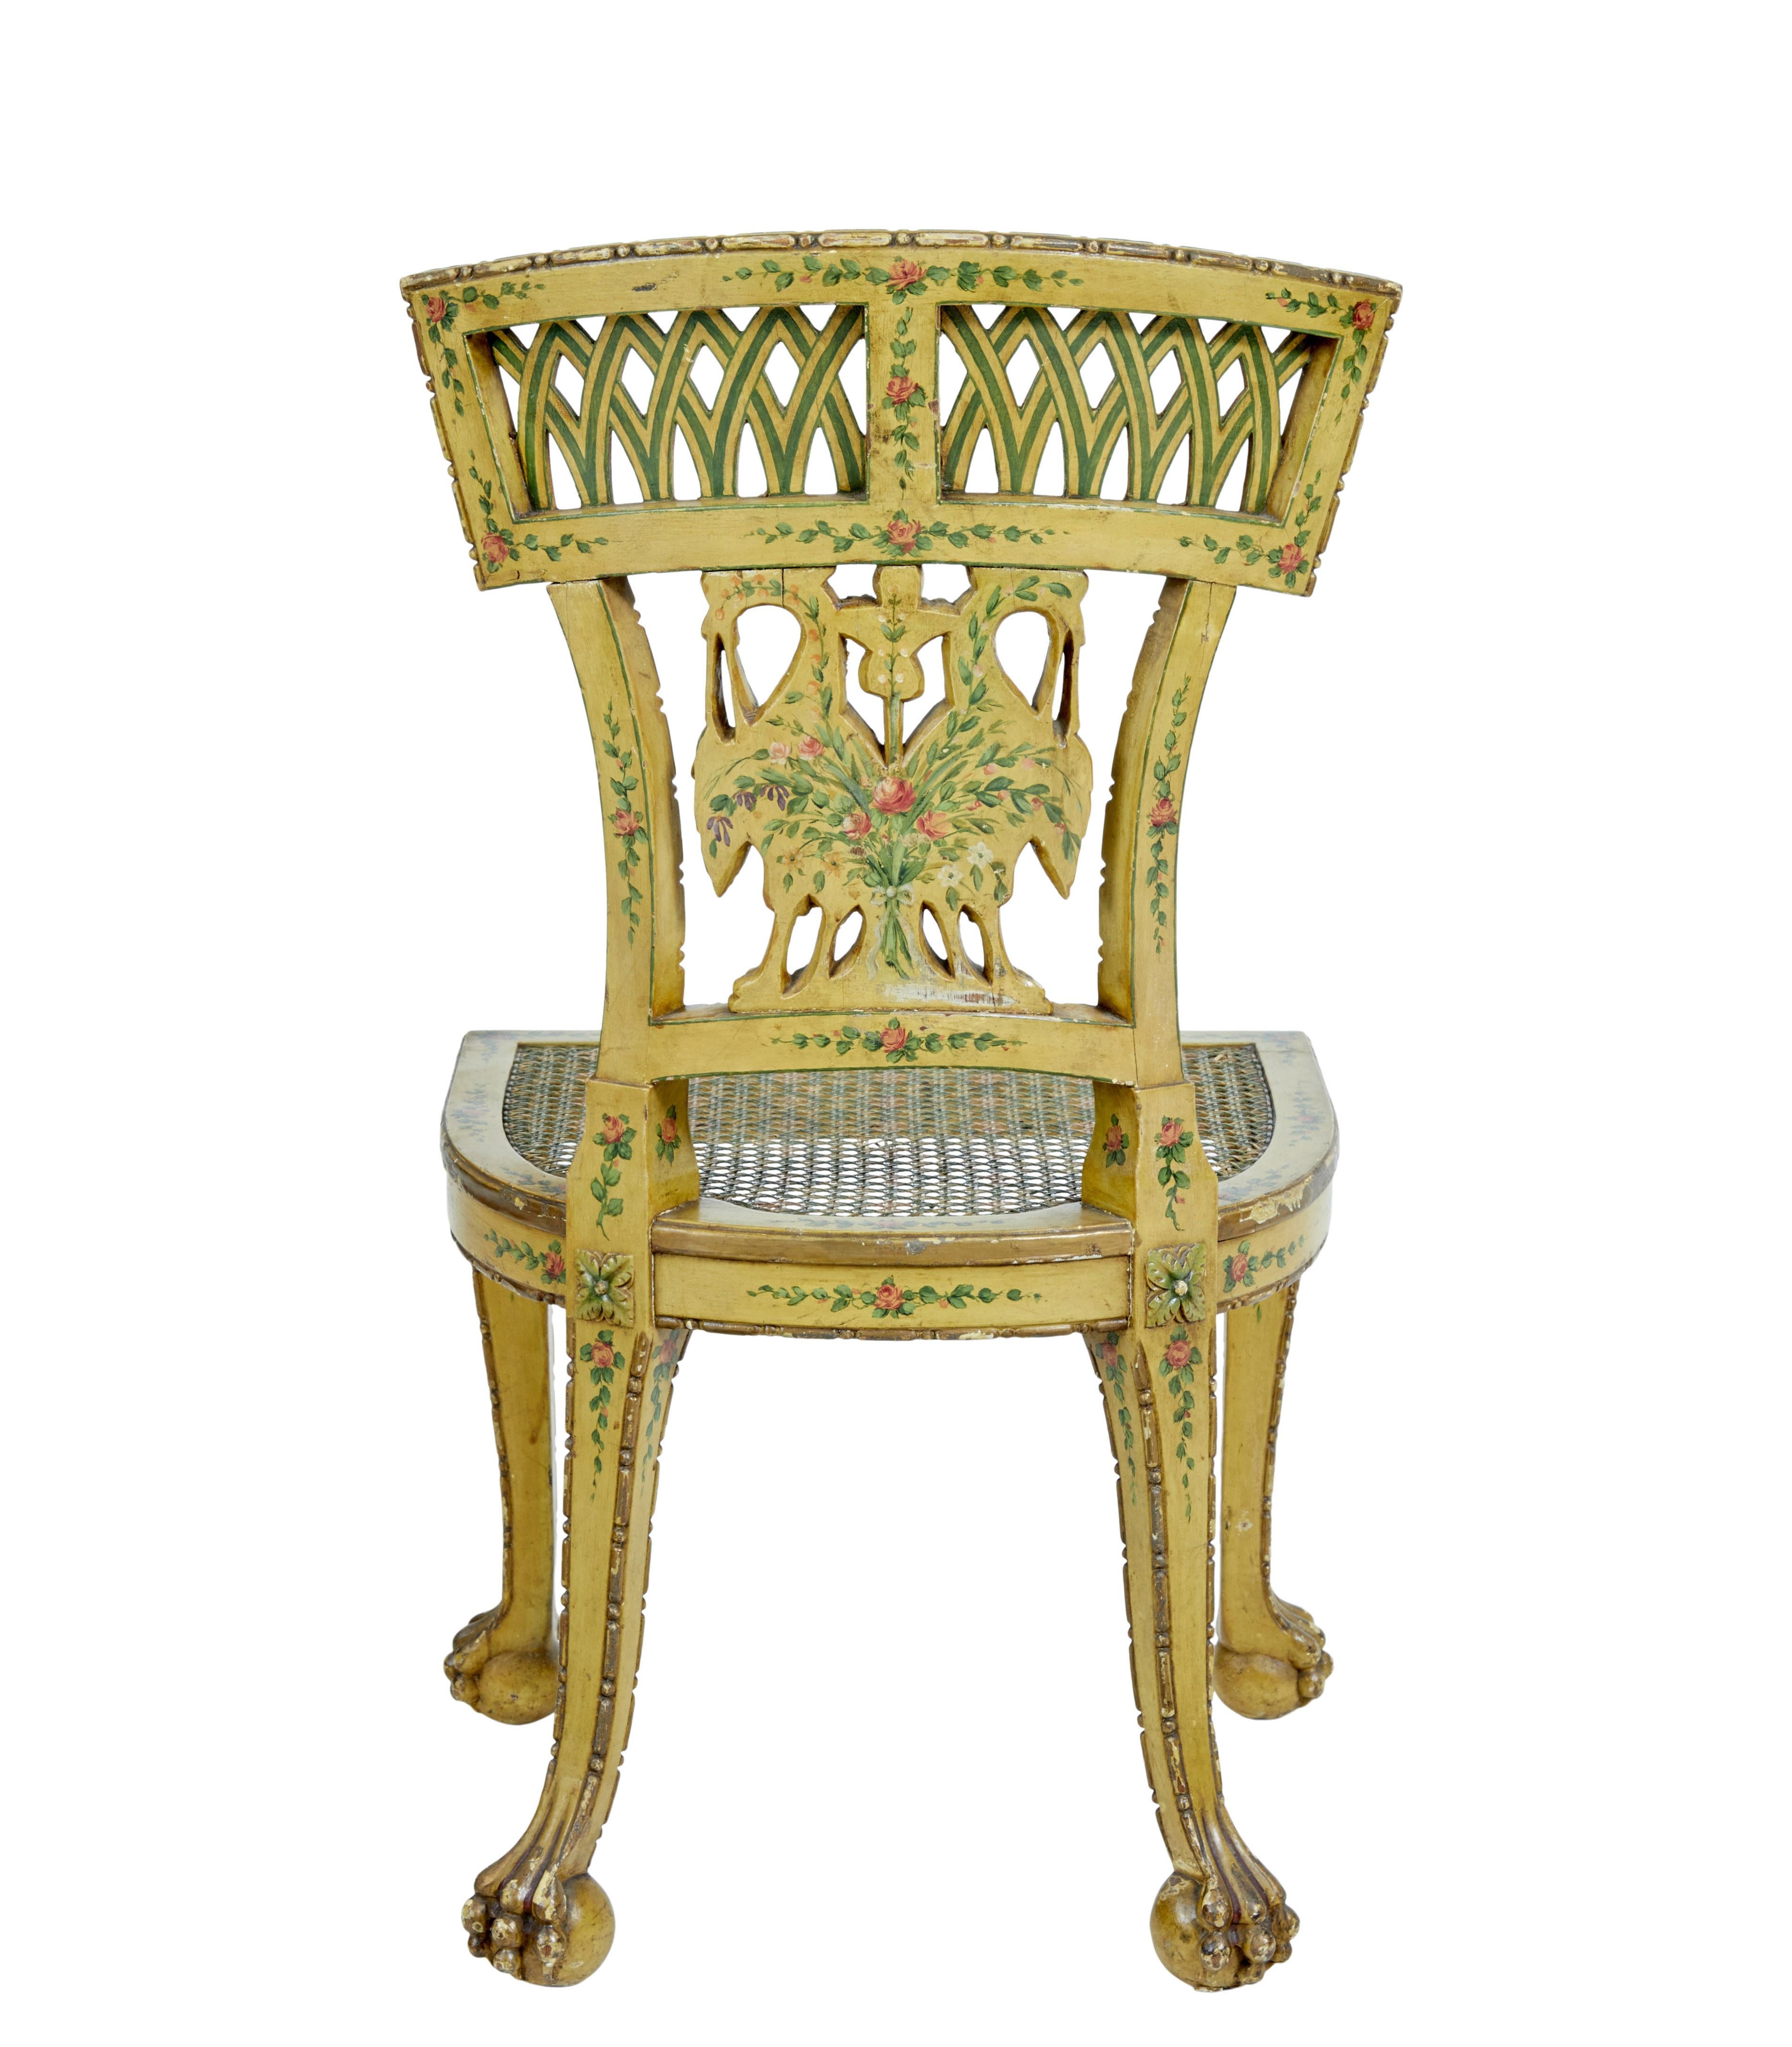 Hand-Carved 19th Century Biedermeier Carved and Painted Cane Chair